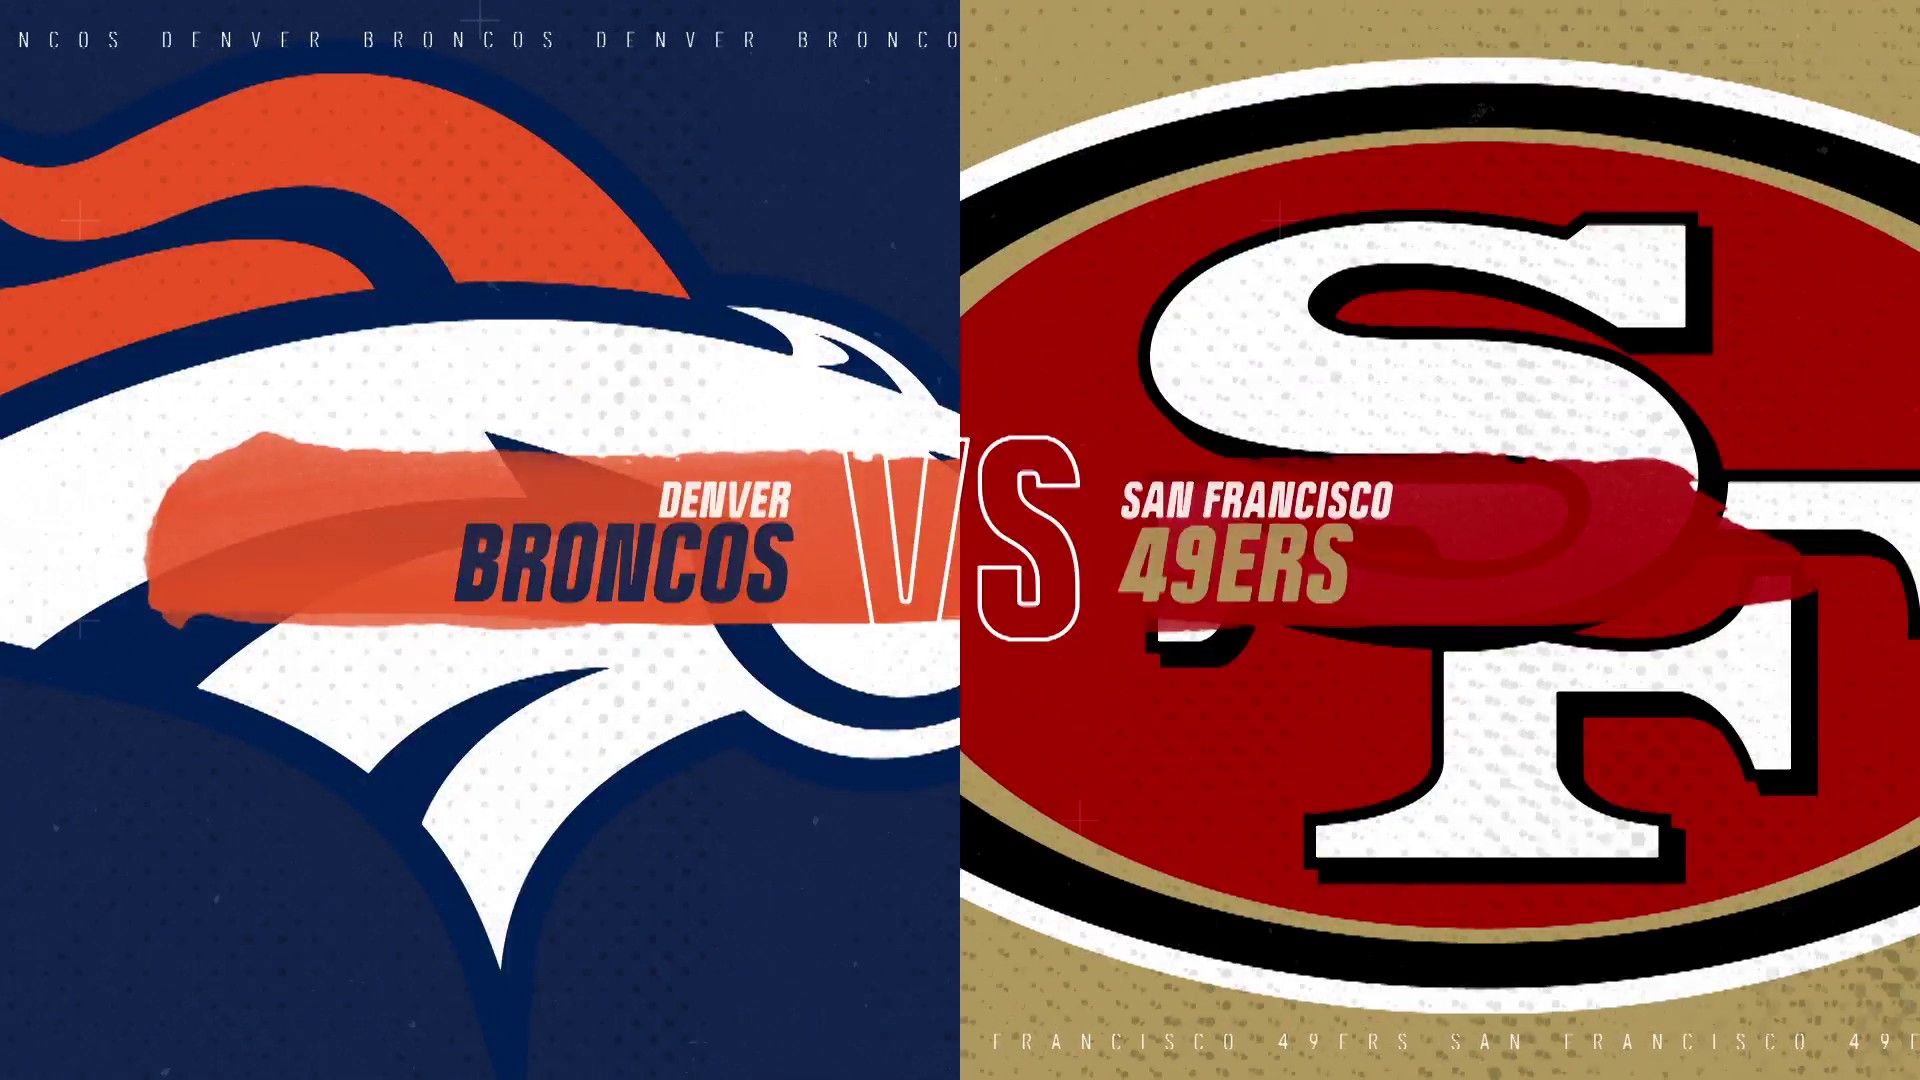 49ers vs. Broncos: Final score and full highlights